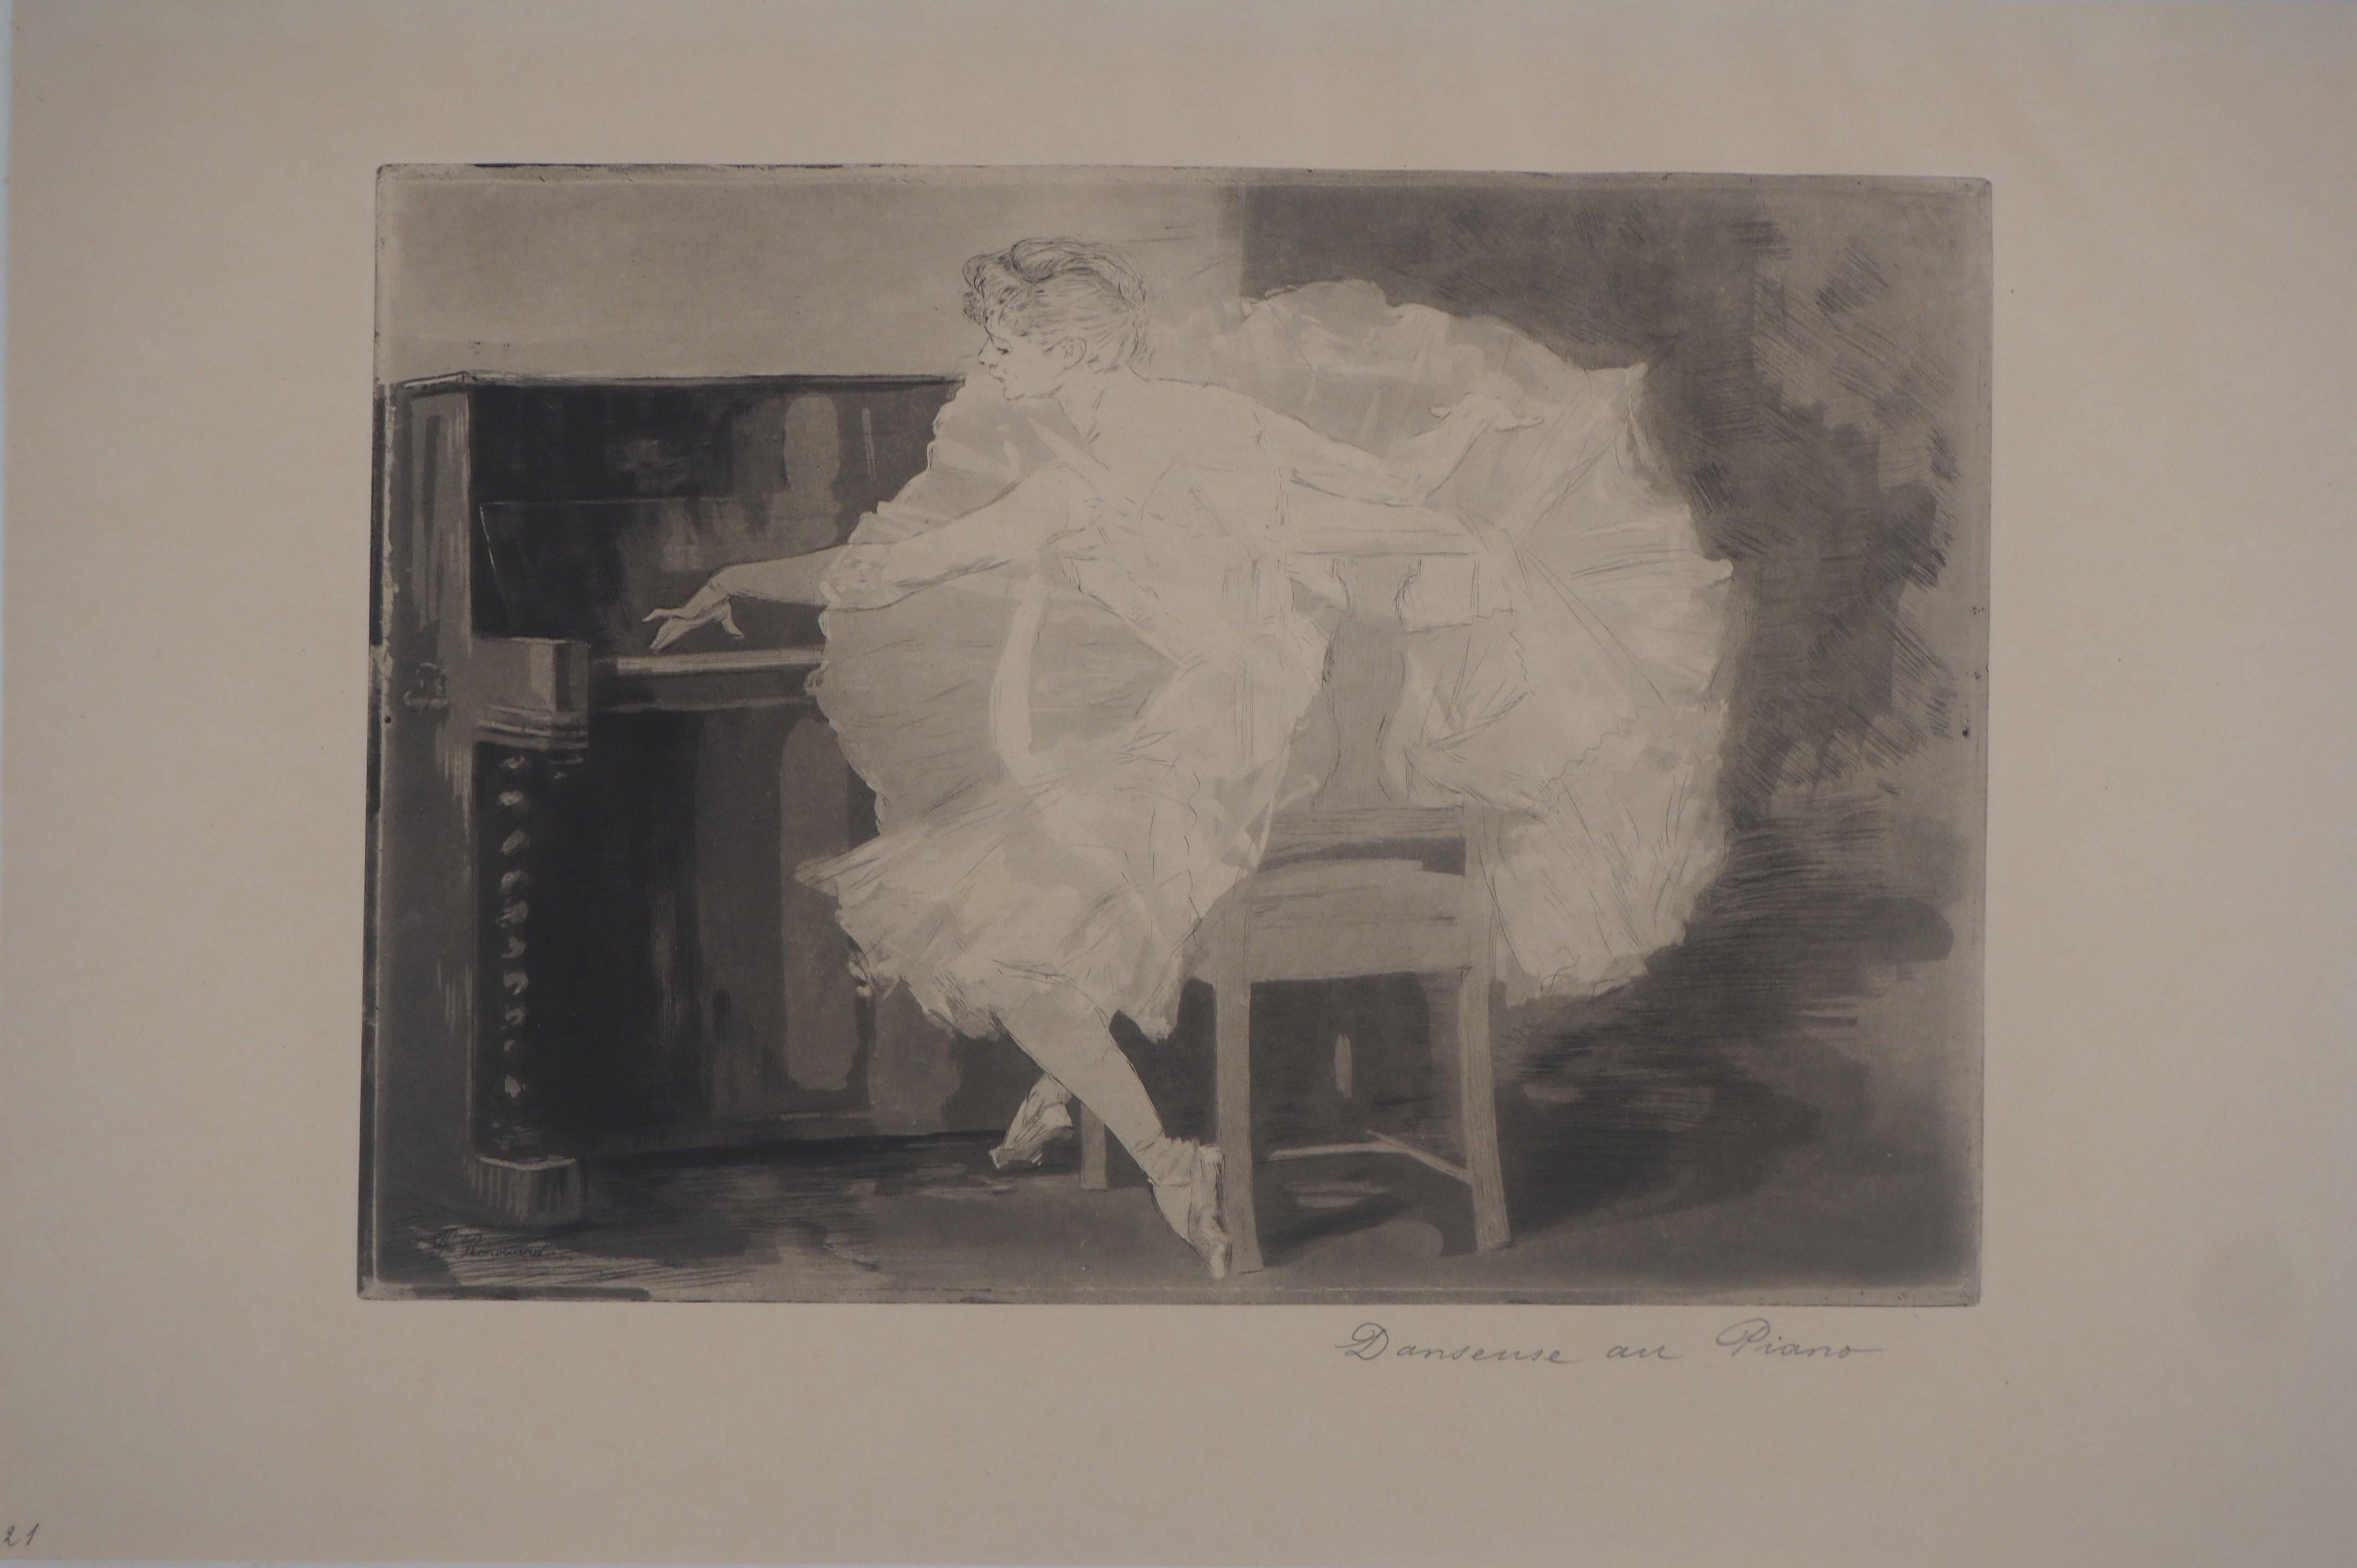 Charles Paul Renouard Figurative Print - Ballerina Playing the Piano - Original etching, Signed